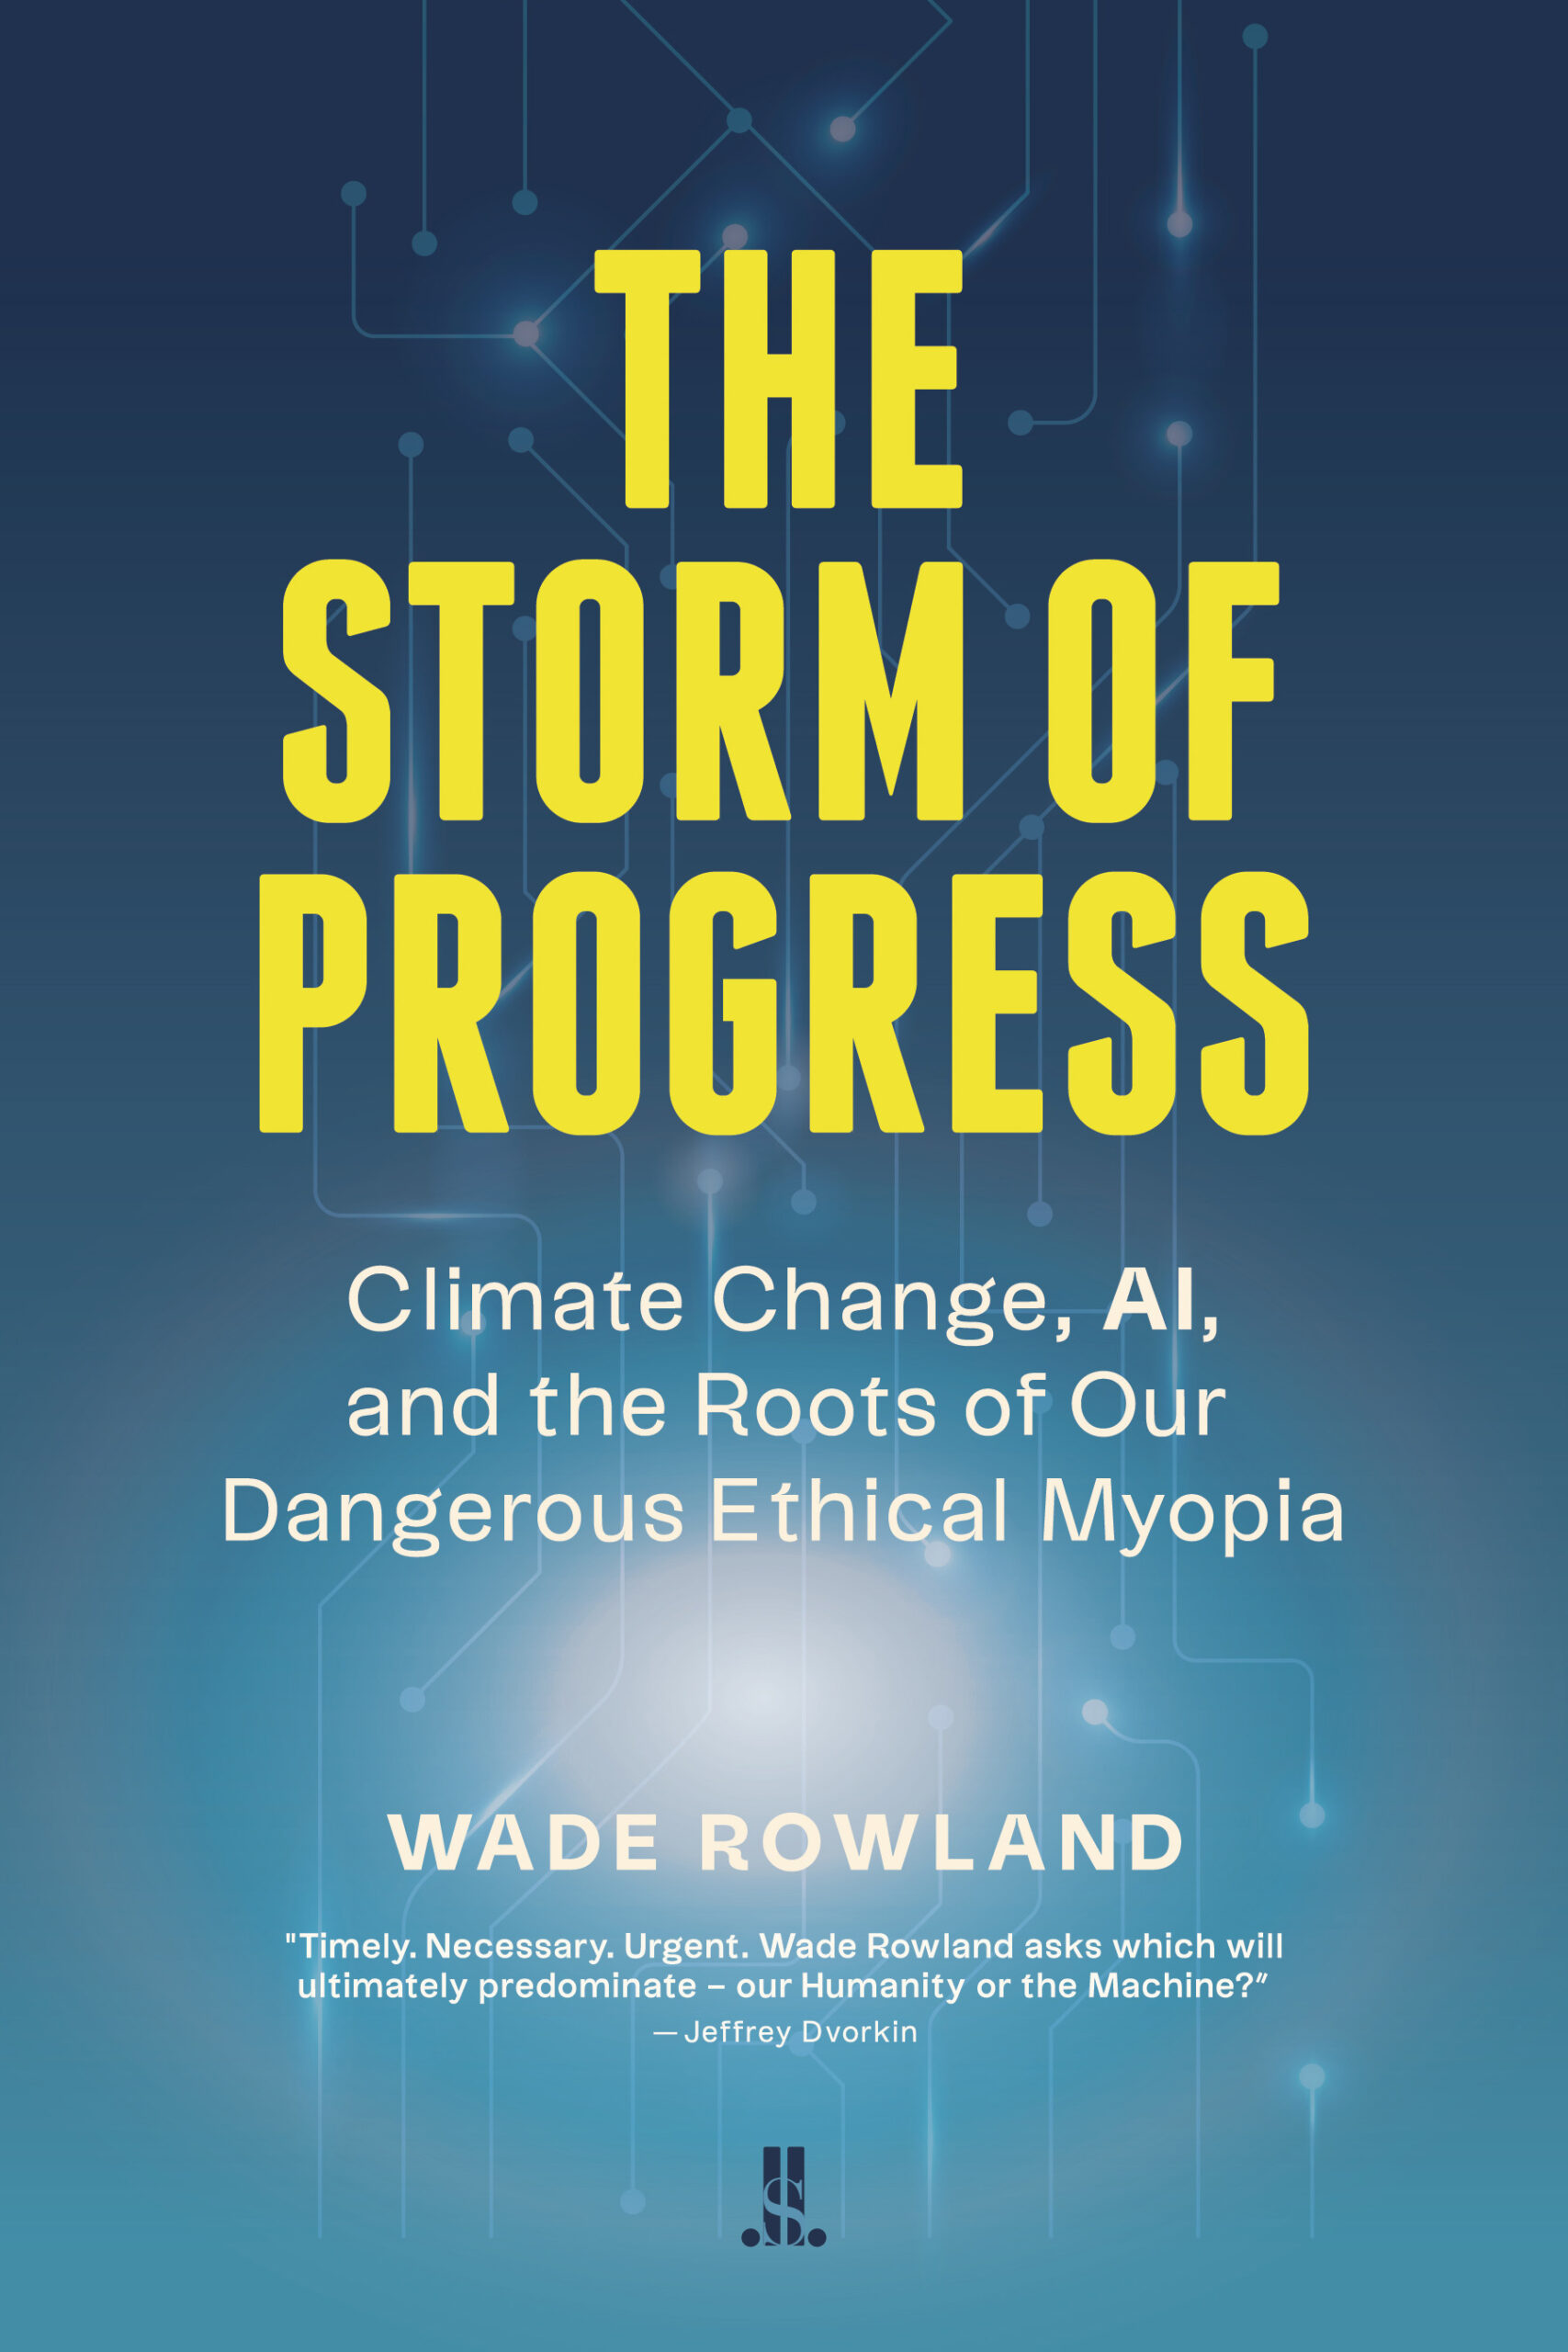 The Storm of Progress: Climate Change, AI, and the Roots of Our Dangerous Ethical Myopia